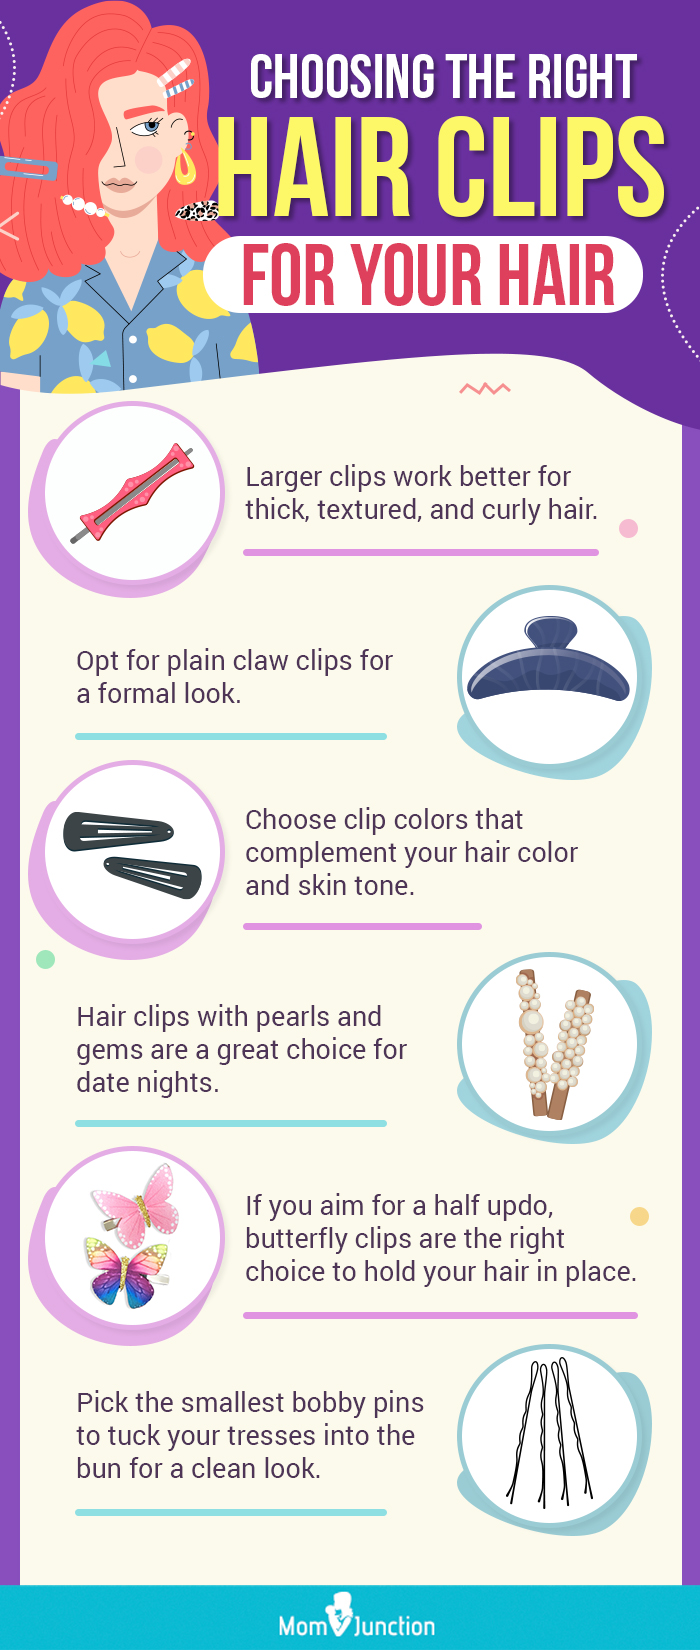 Choosing The Right Hair Clips For Your Hair (infographic)